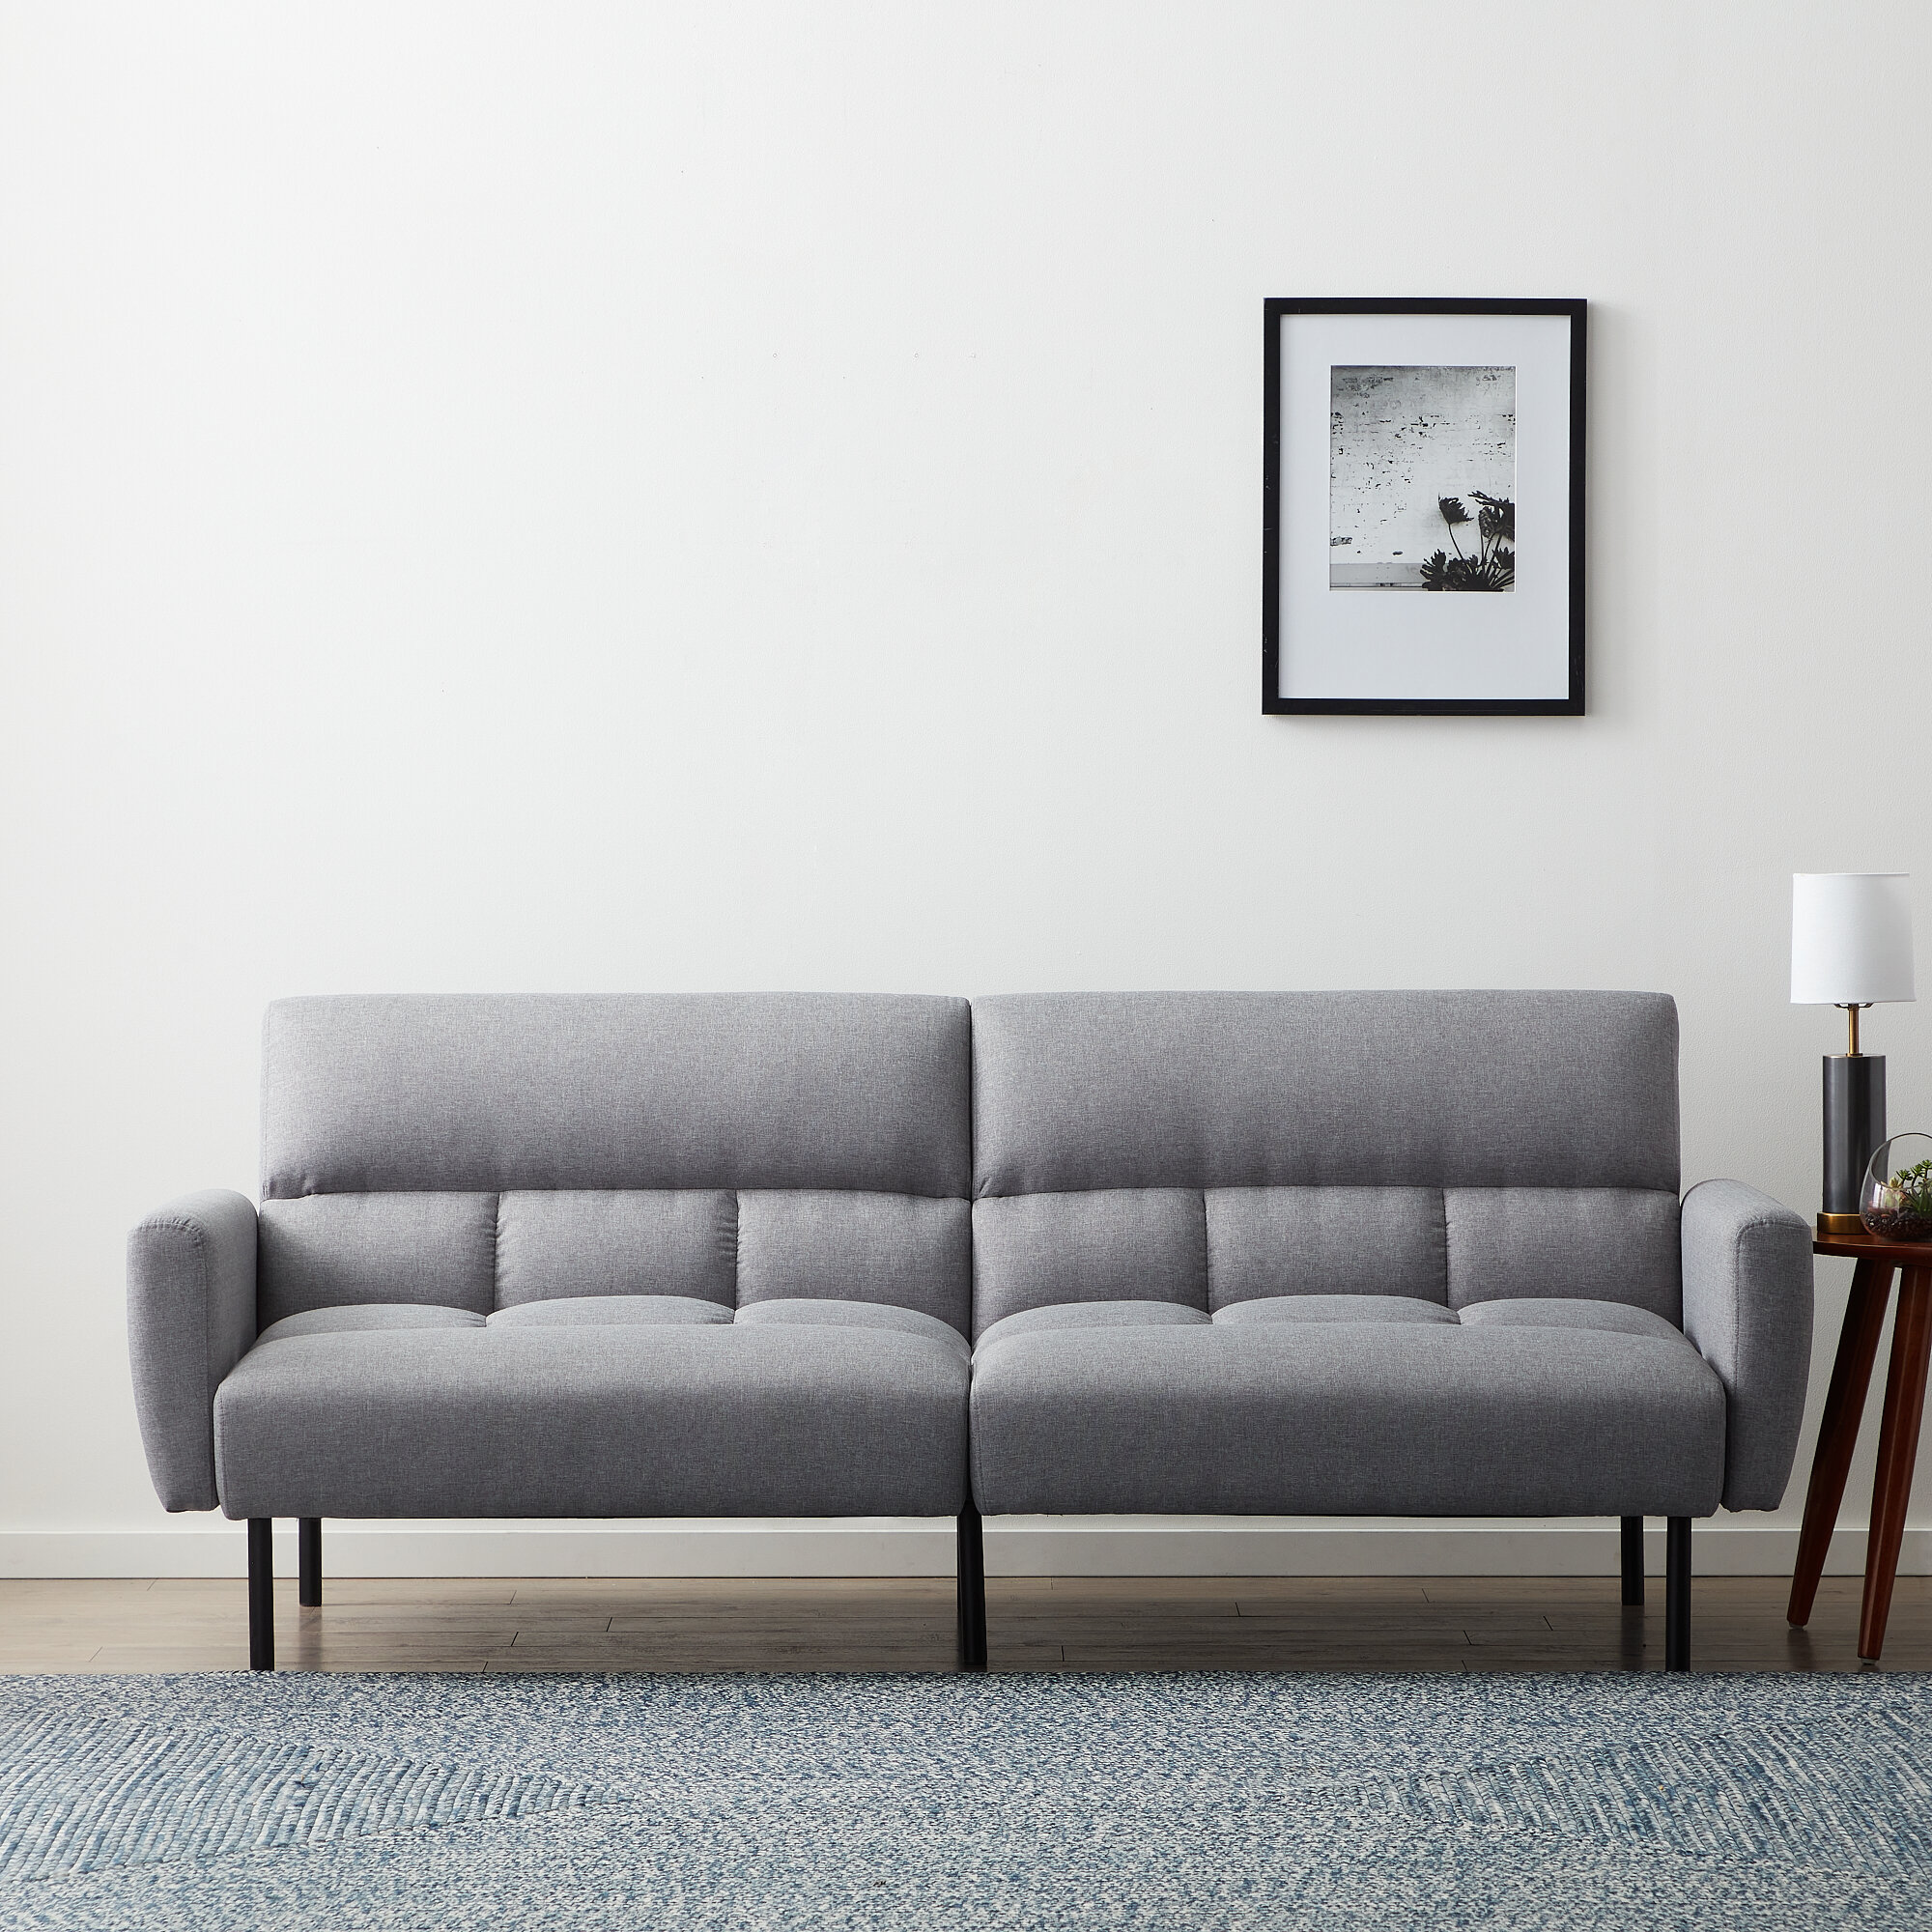 LucidComfortCollection Ollie Futon Sofa Bed with Box Tufting & Reviews | Wayfair